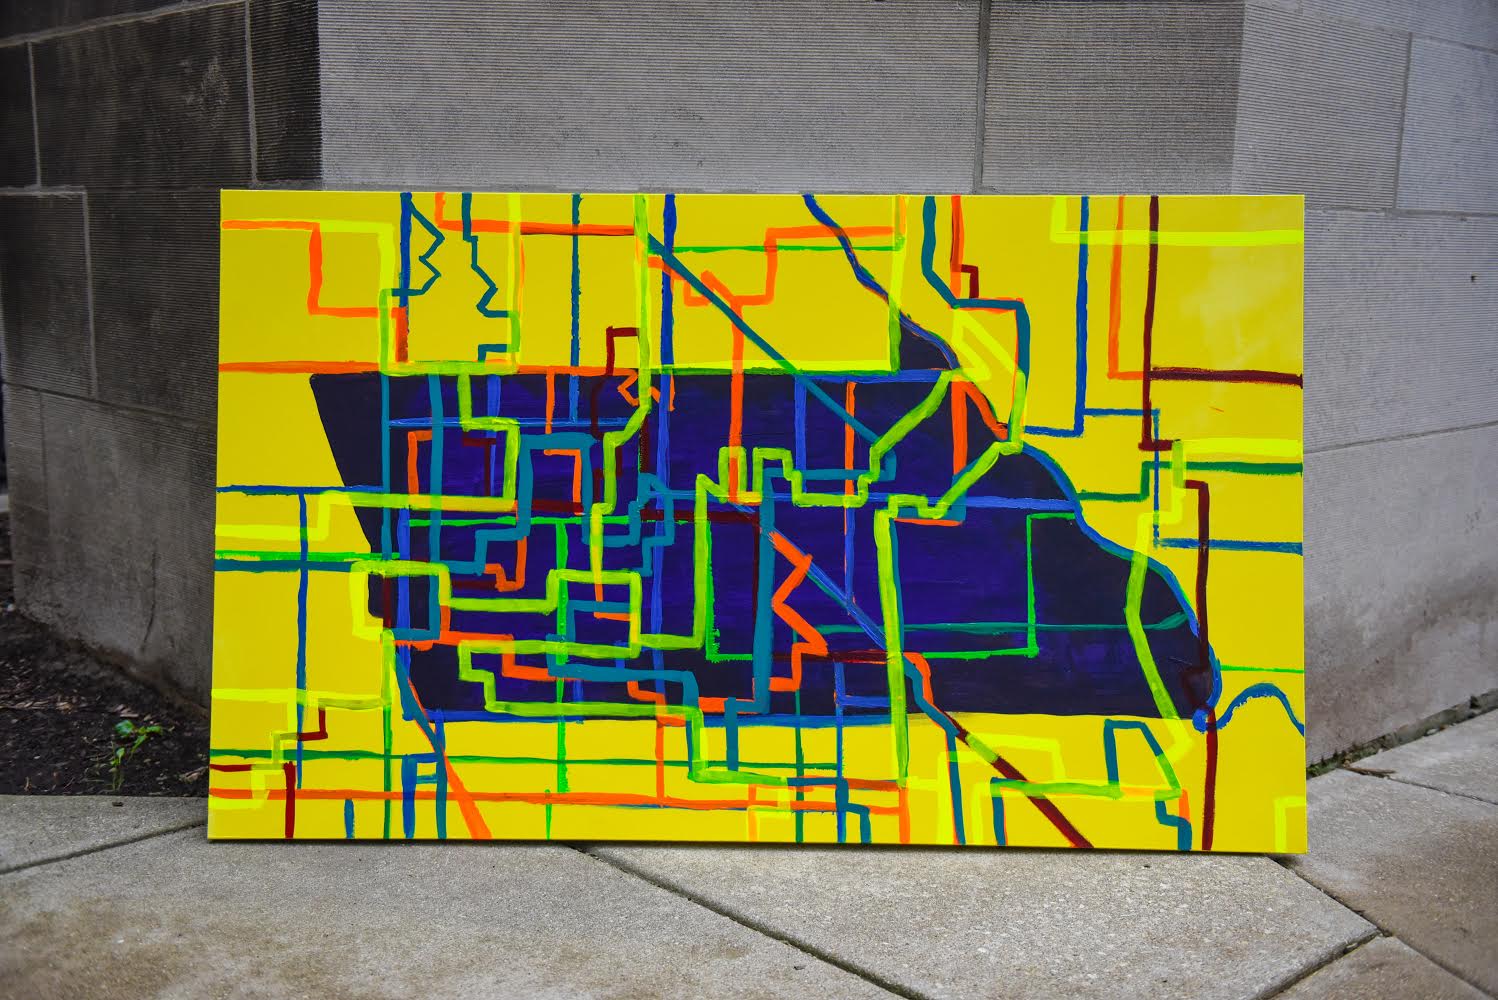 A map of ward boundaries over Logan Square, rendered as a painting on canvas